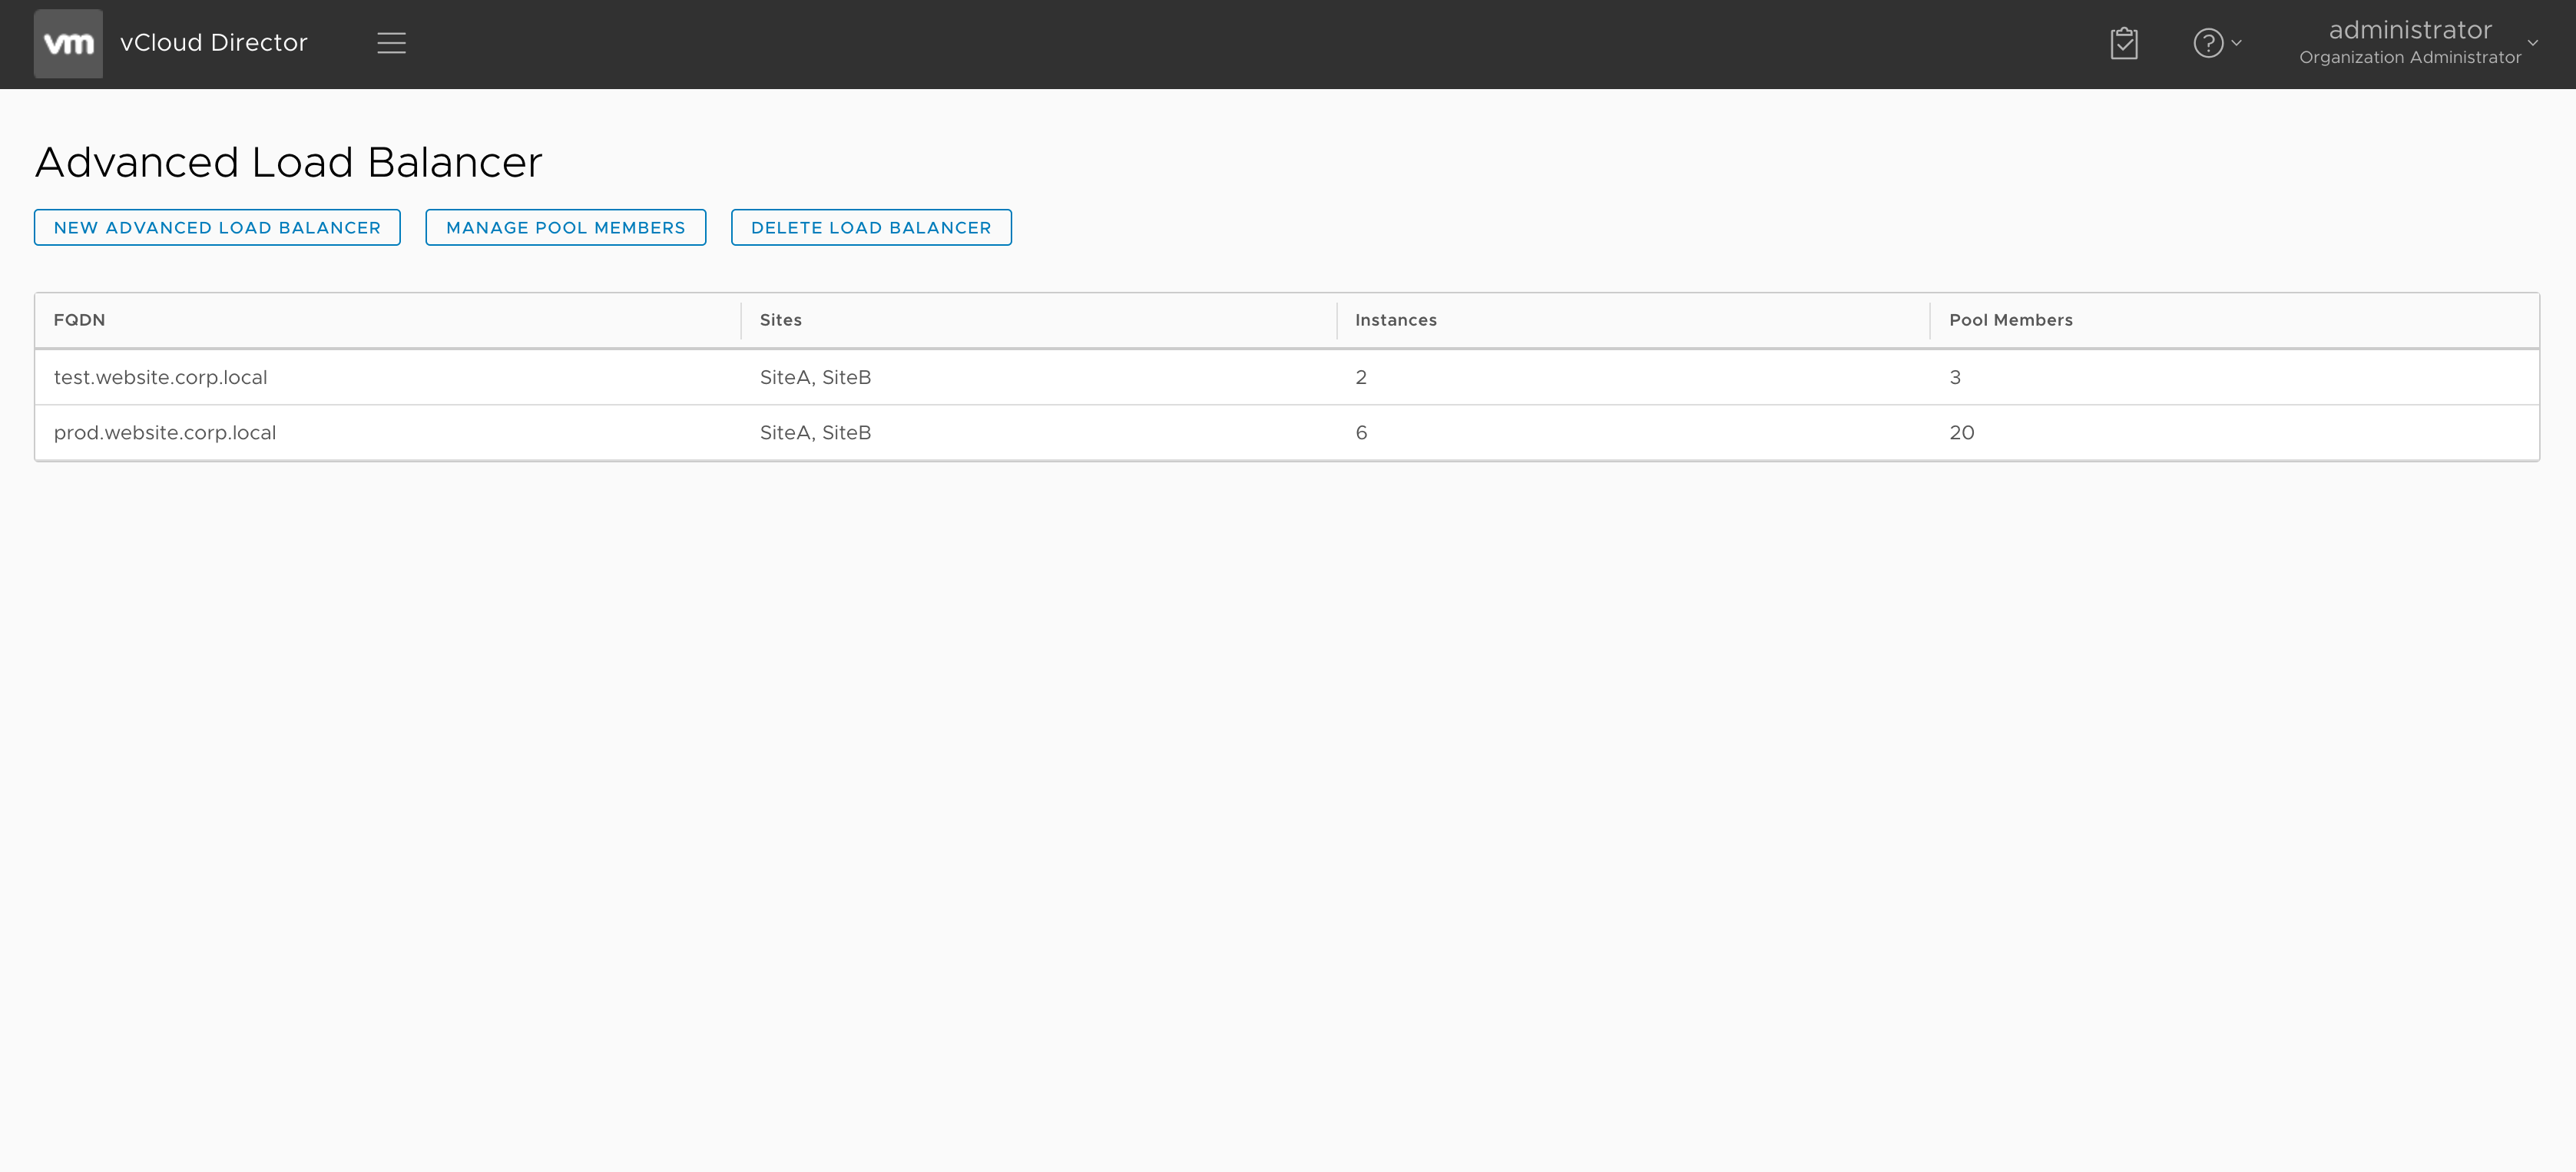 Integrated NSX Load Balancers into vCloud Director